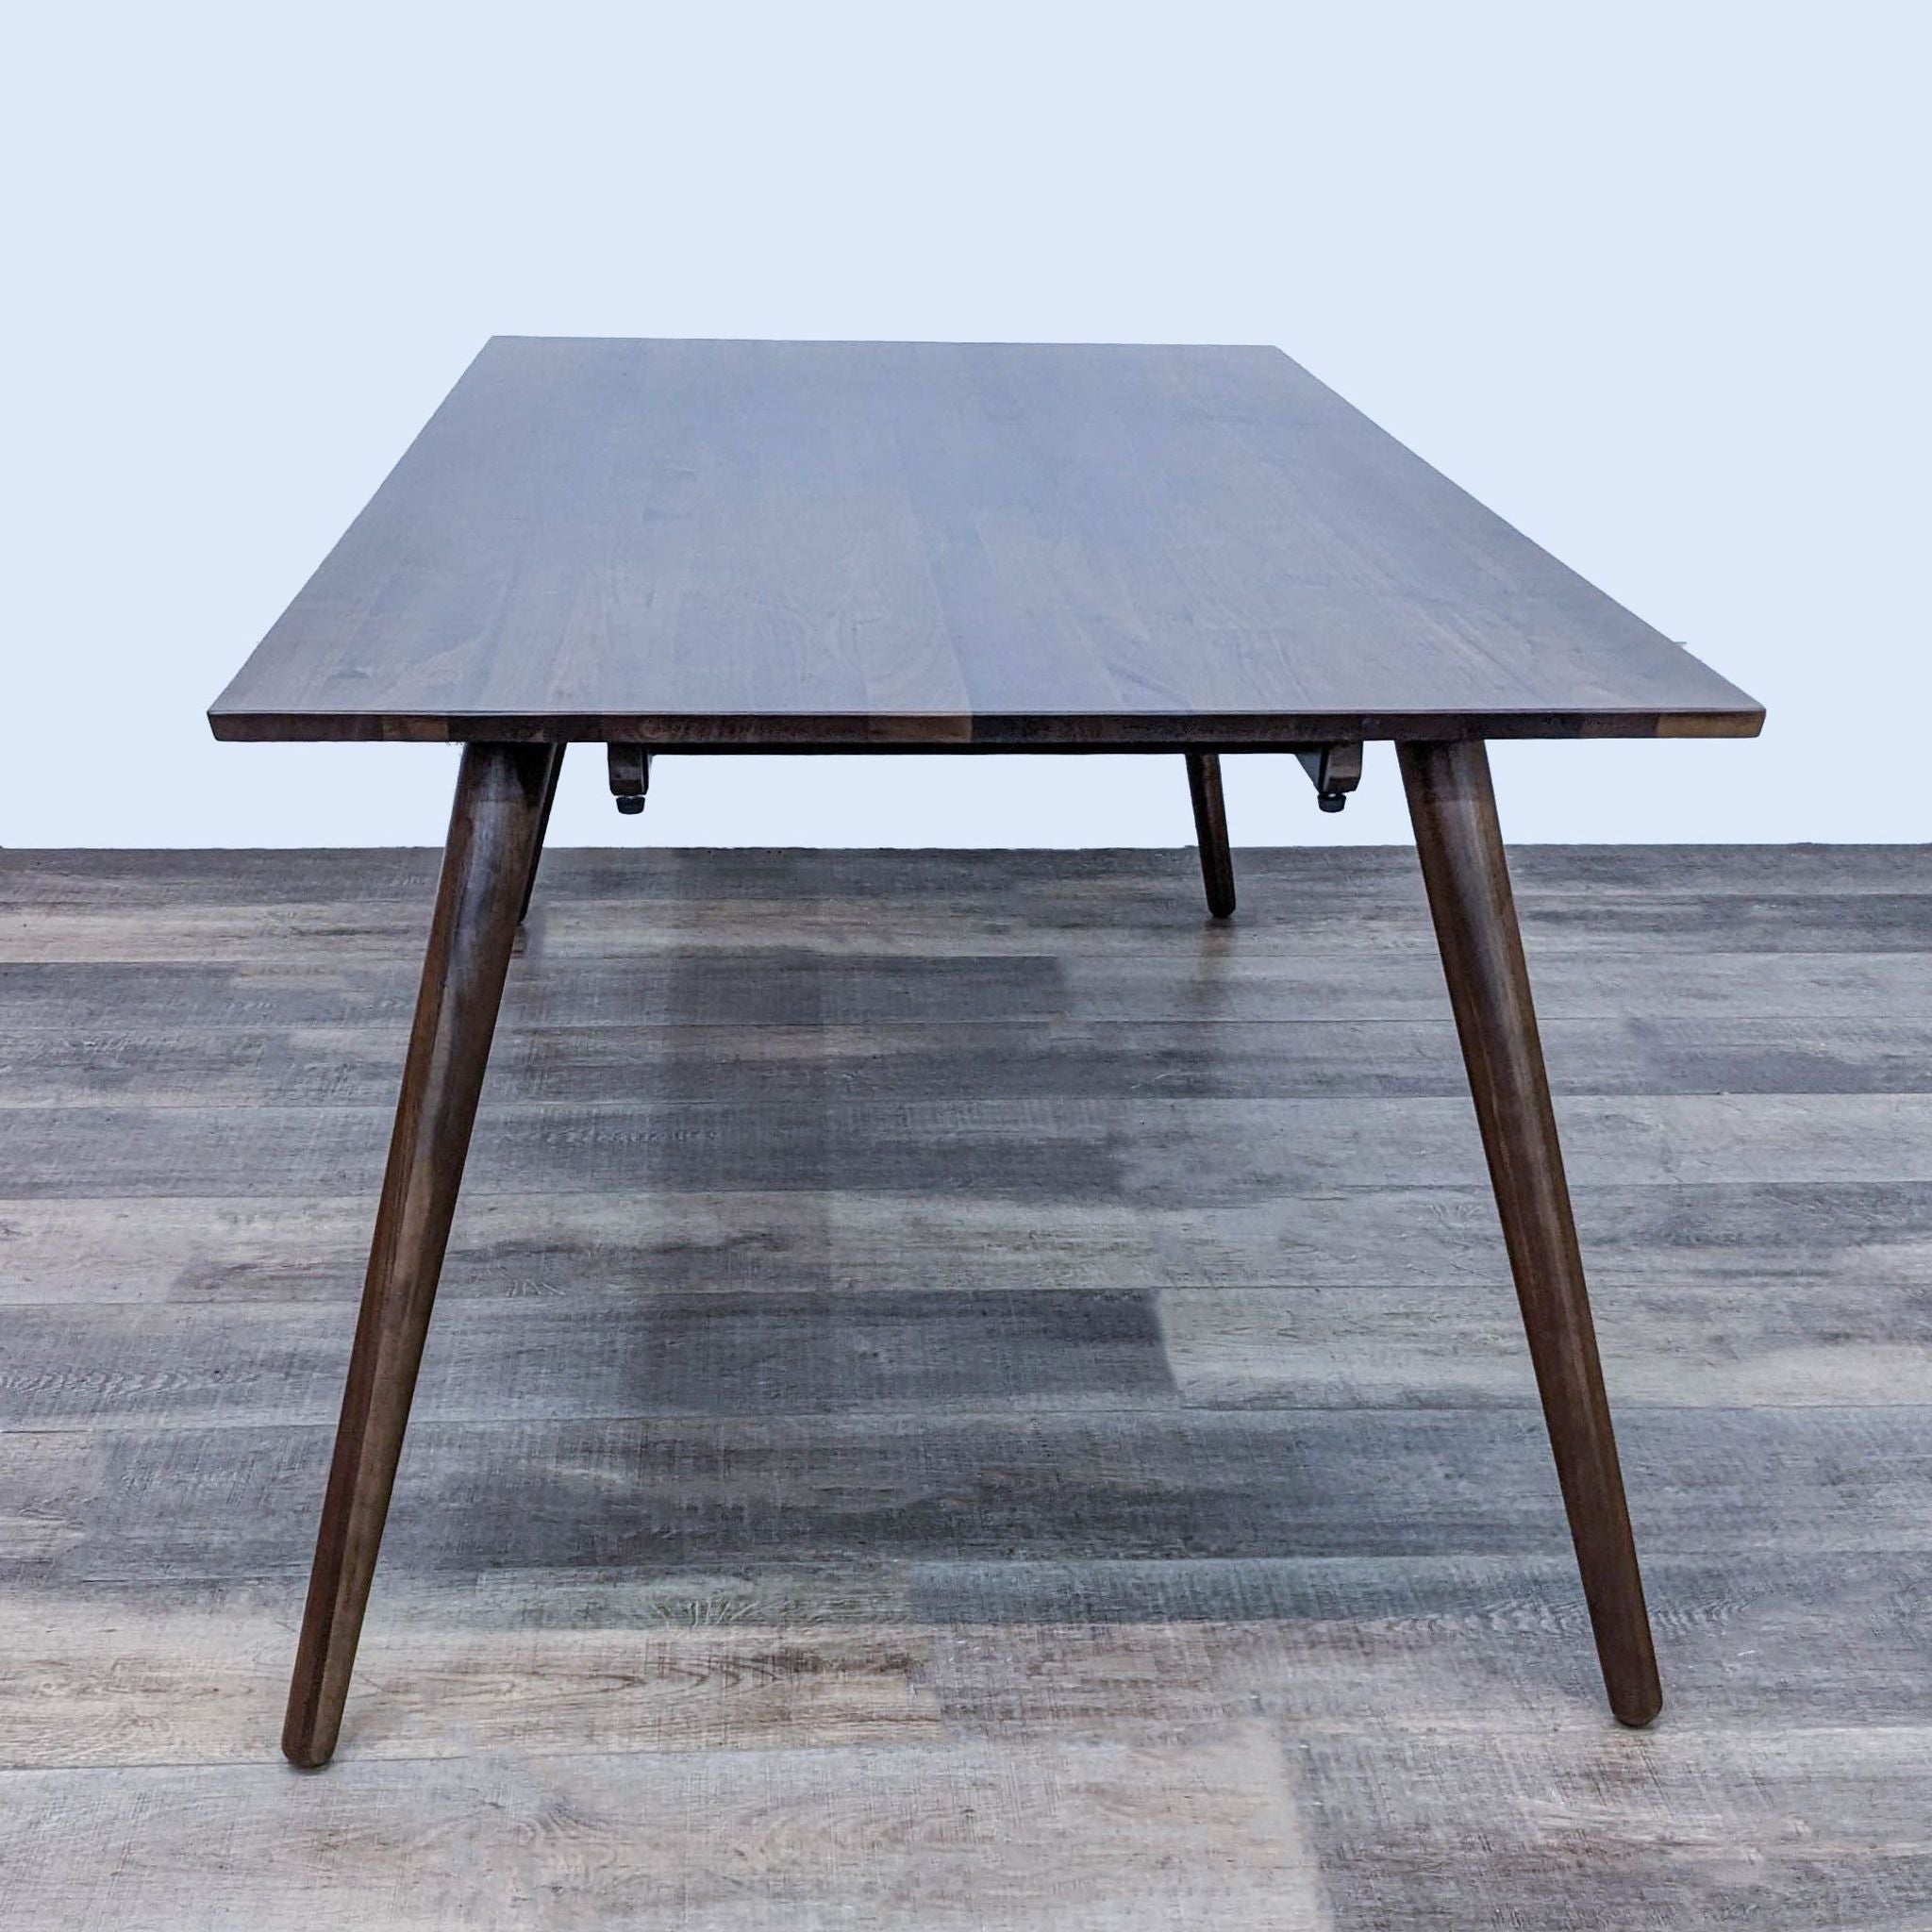 Seno Dining Table by Article, featuring clean lines, walnut finish, and angled legs for a retro modern touch.